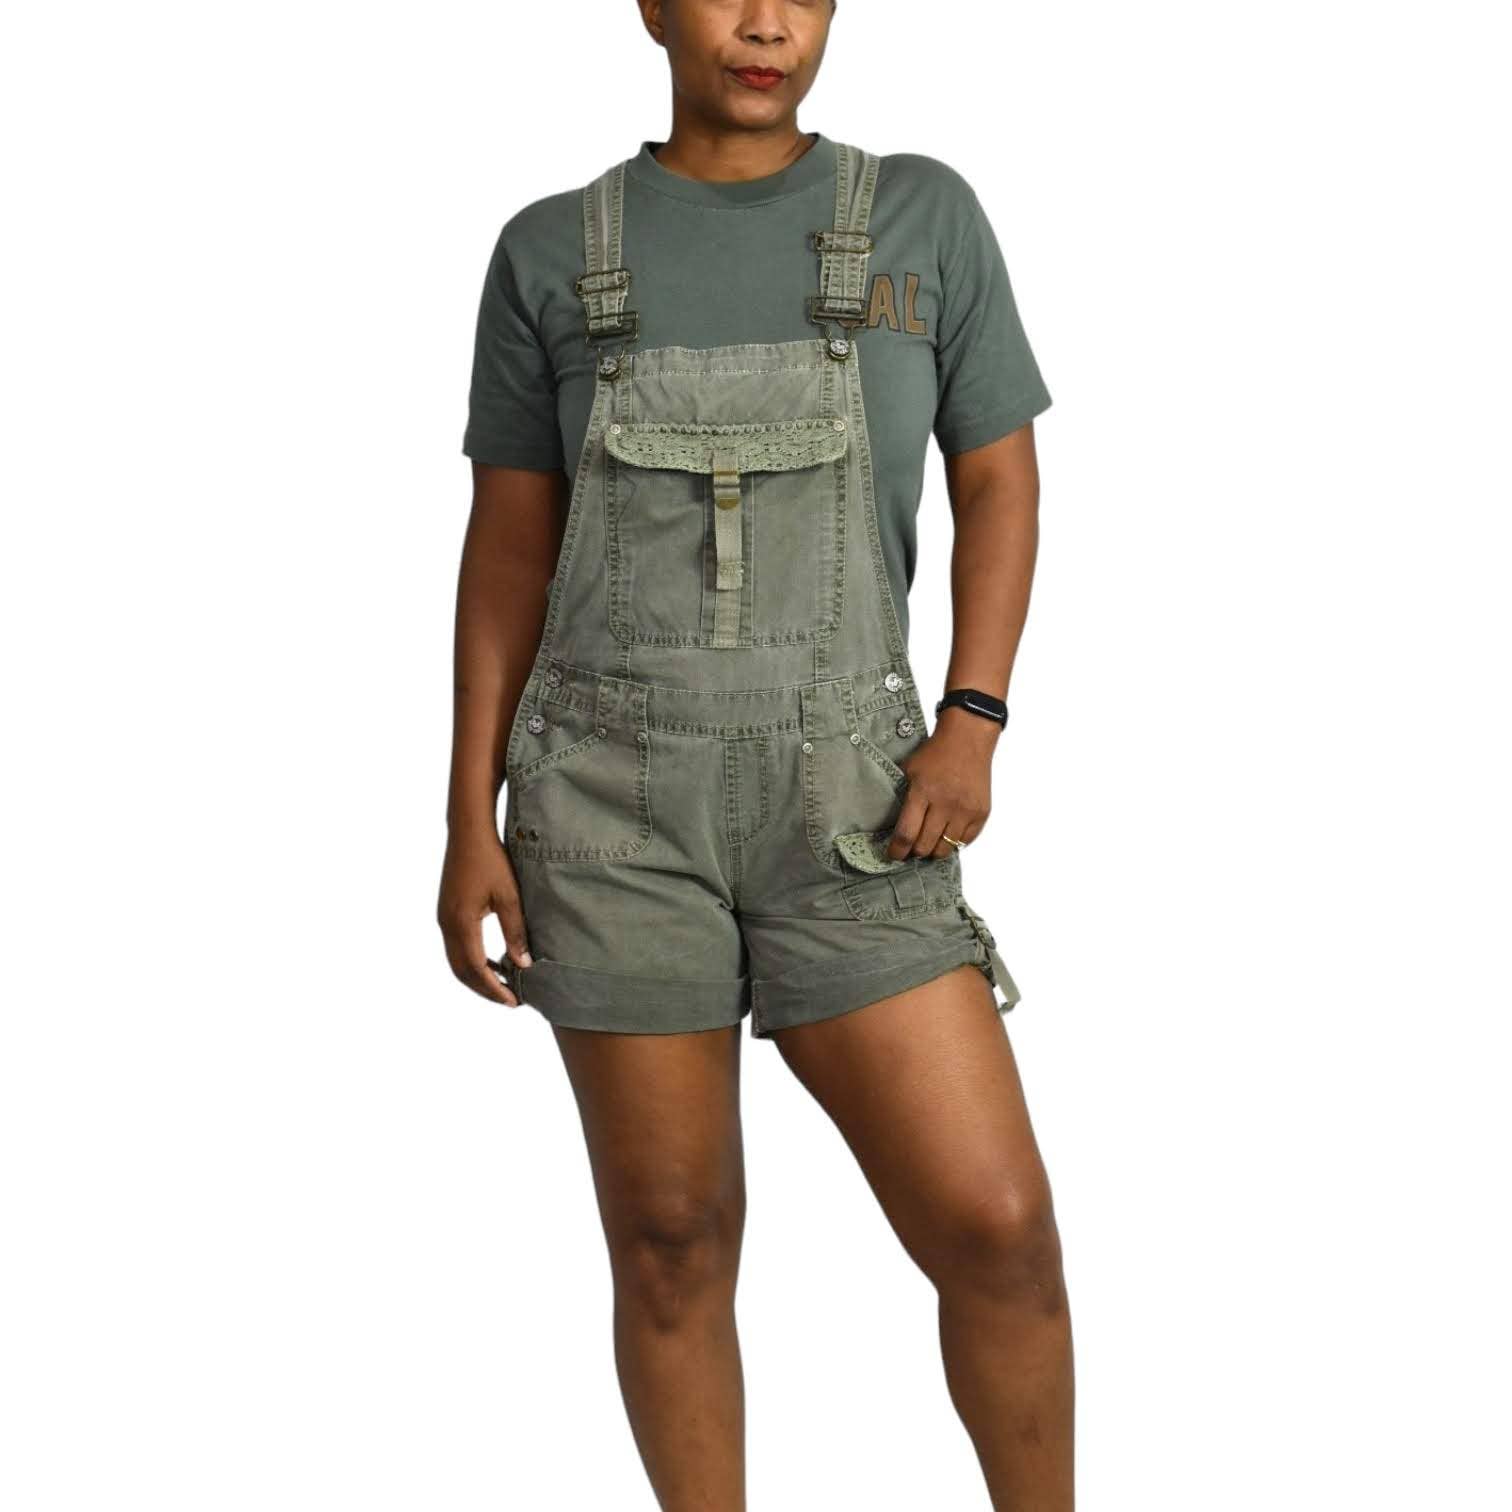 Vintage Squeeze Shortalls Bib Overalls Green Cuffed Cargo Low Rise Y2K Shorts Size Small